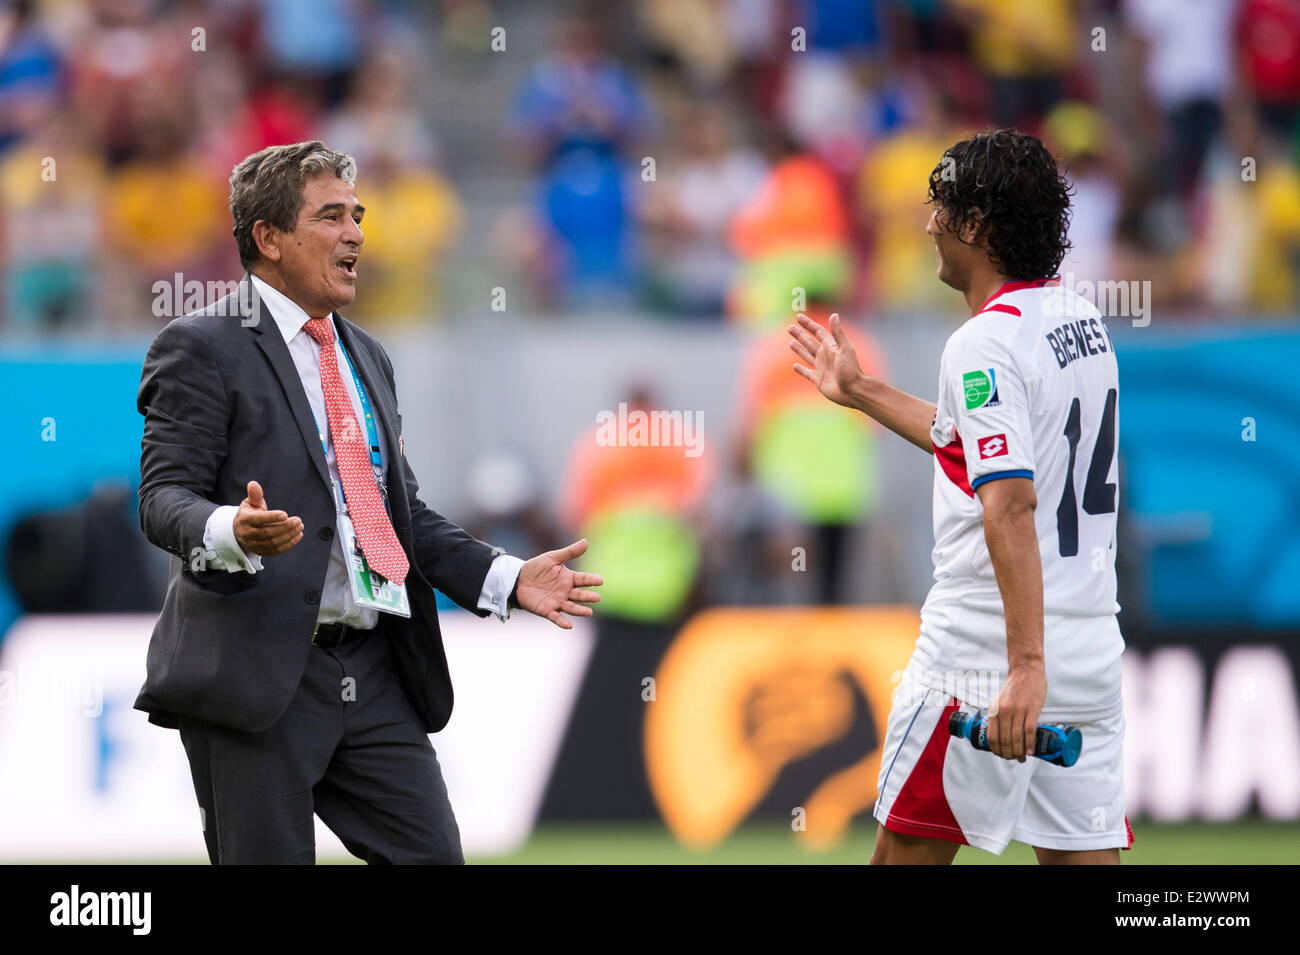 Recife, Brazil. 20th June, 2014. (L-R) Jorge Luis Pinto, Randall Brenes (CRC) Football/Soccer : Costa Rica head coach Jorge Luis Pinto celebrates after winning the FIFA World Cup Brazil 2014 Group D match between Italy 0-1 Costa Rica at Arena Pernambuco in Recife, Brazil . Credit:  Maurizio Borsari/AFLO/Alamy Live News Stock Photo